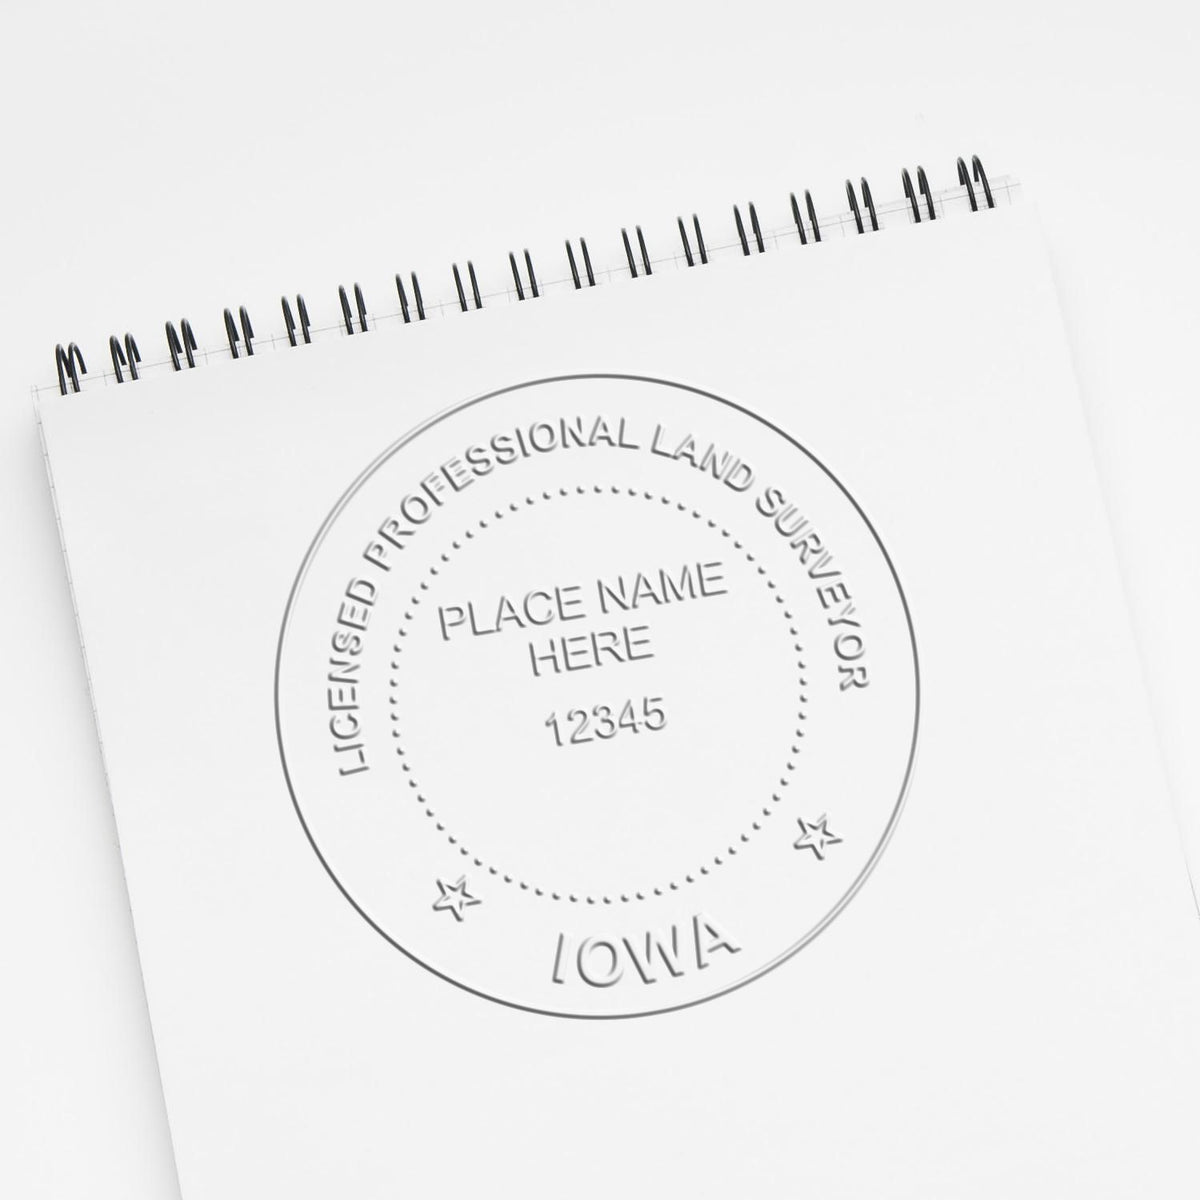 An alternative view of the Hybrid Iowa Land Surveyor Seal stamped on a sheet of paper showing the image in use